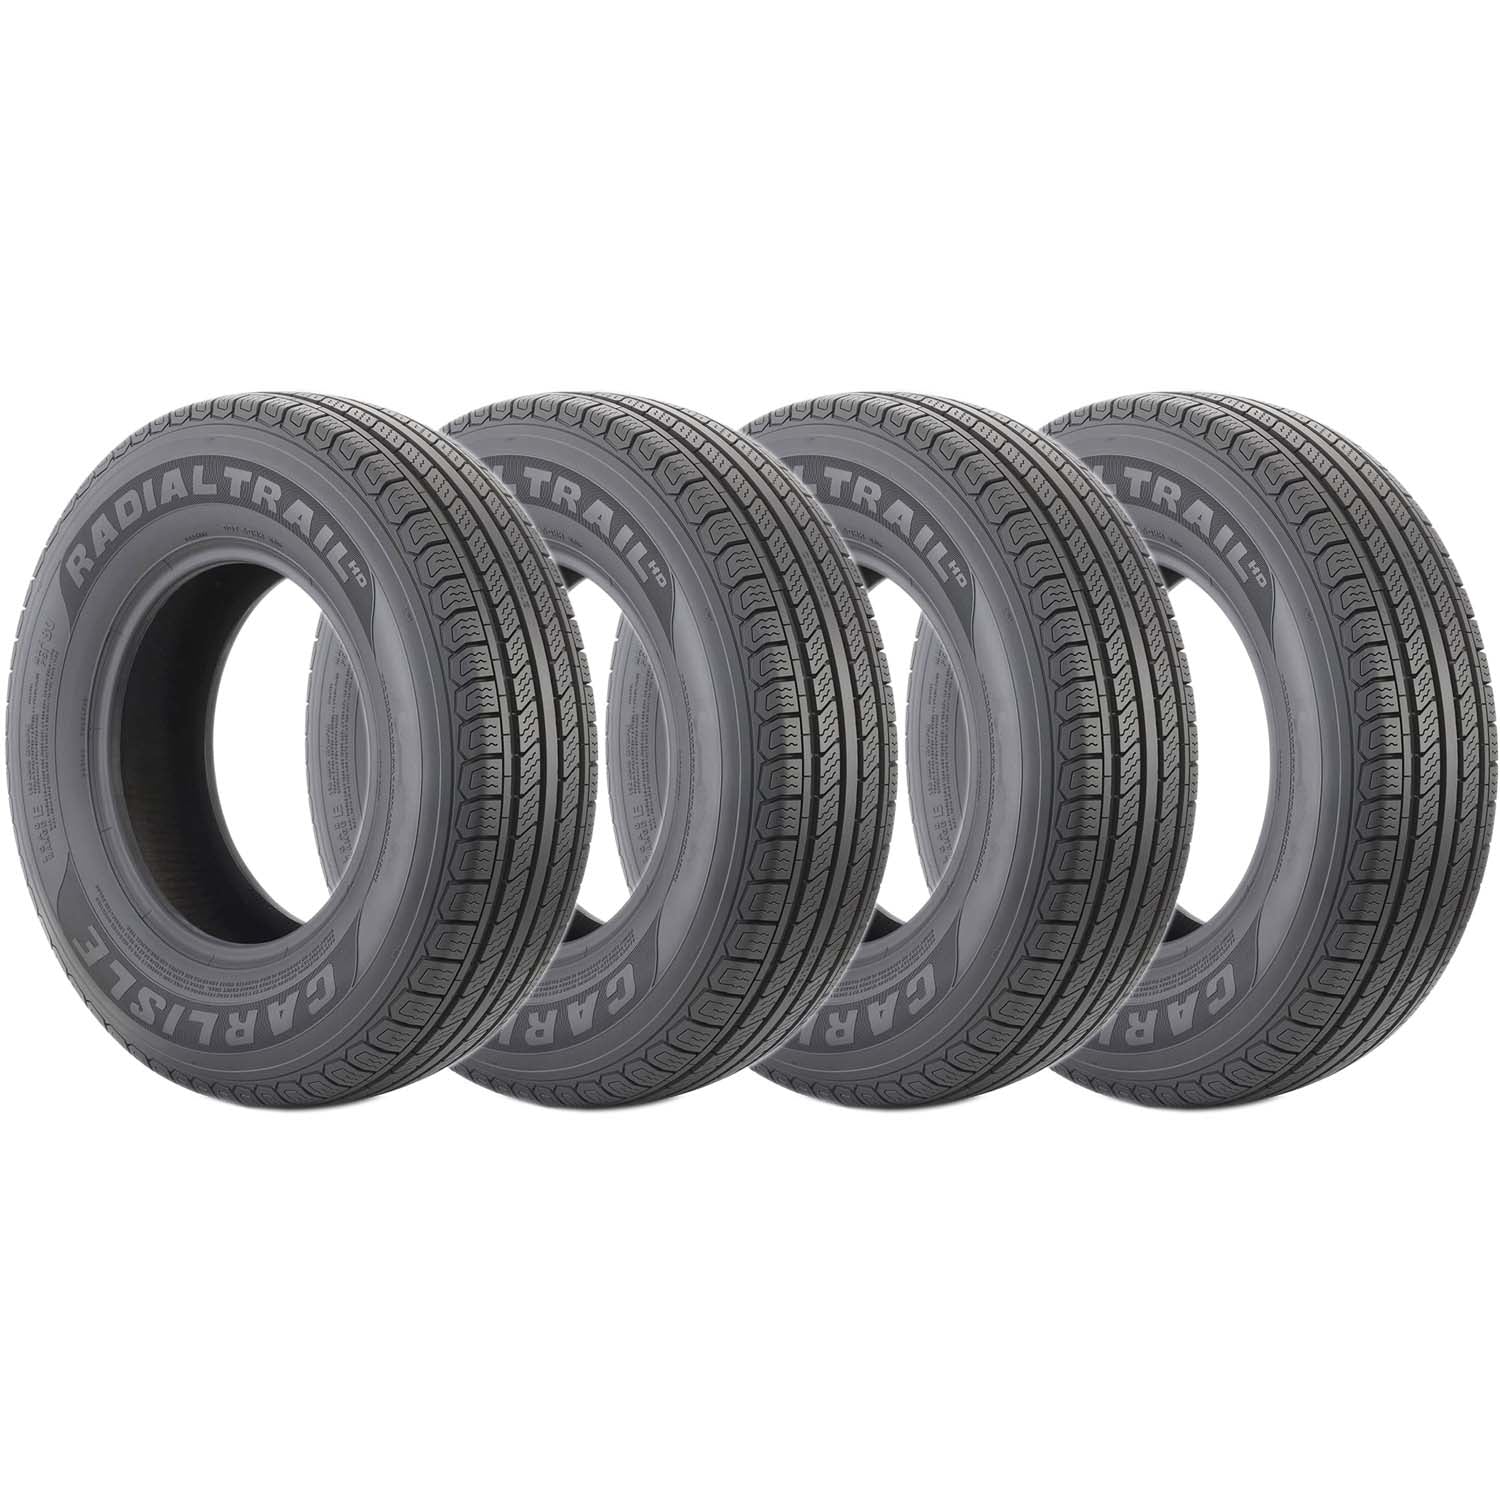 Carlisle Radial Trail HD Trailer Tire LRC 6ply 205/75R14 Pack of 4